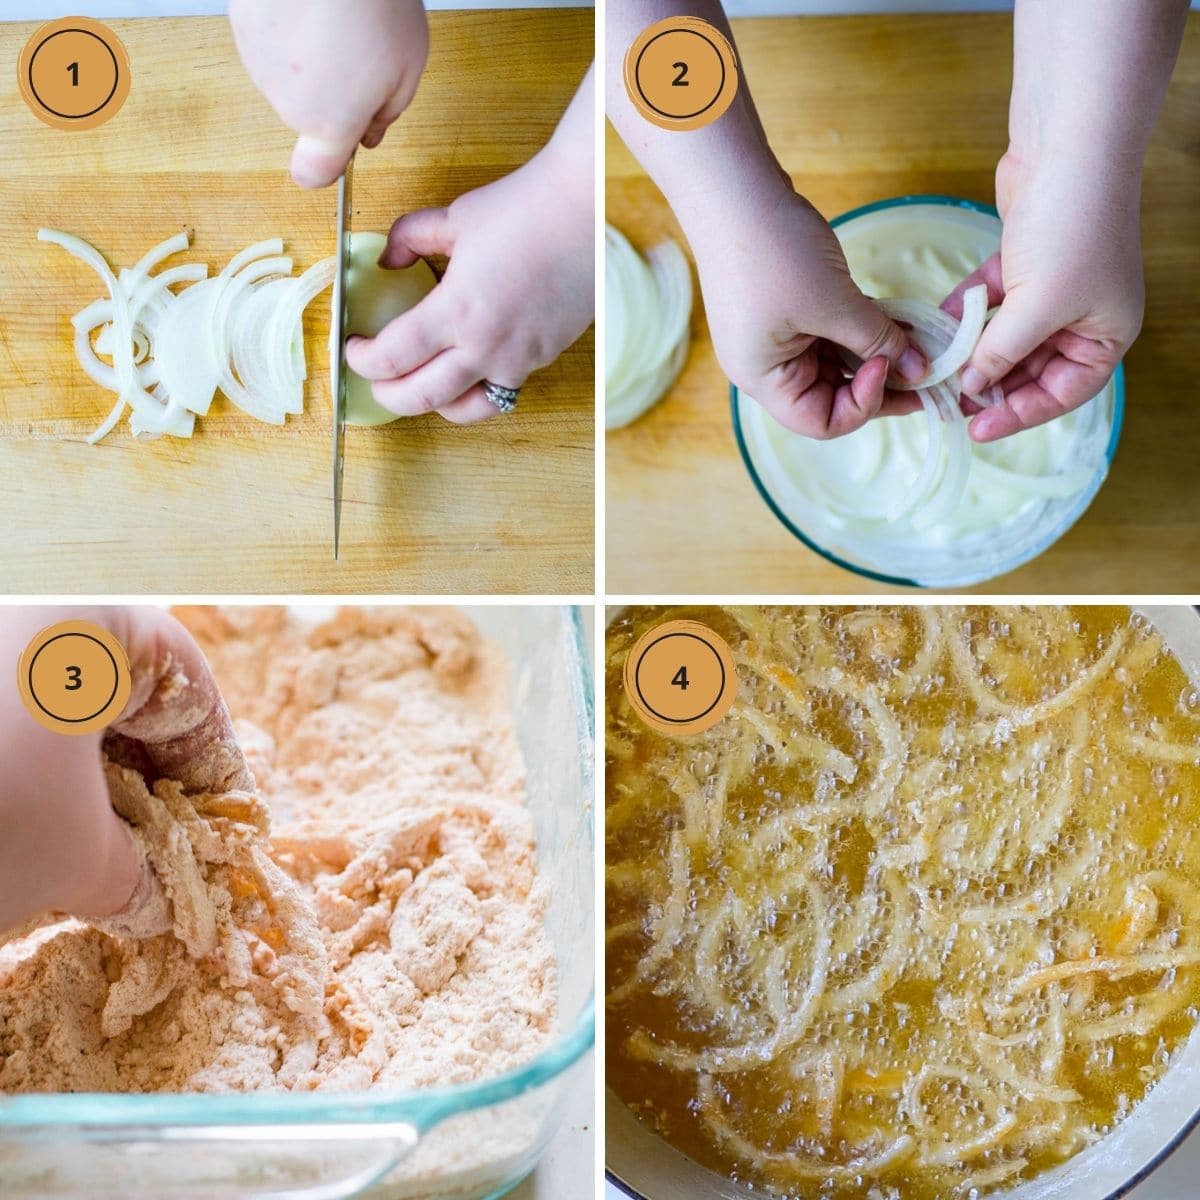 Four images showing steps to make crispy onion strings.